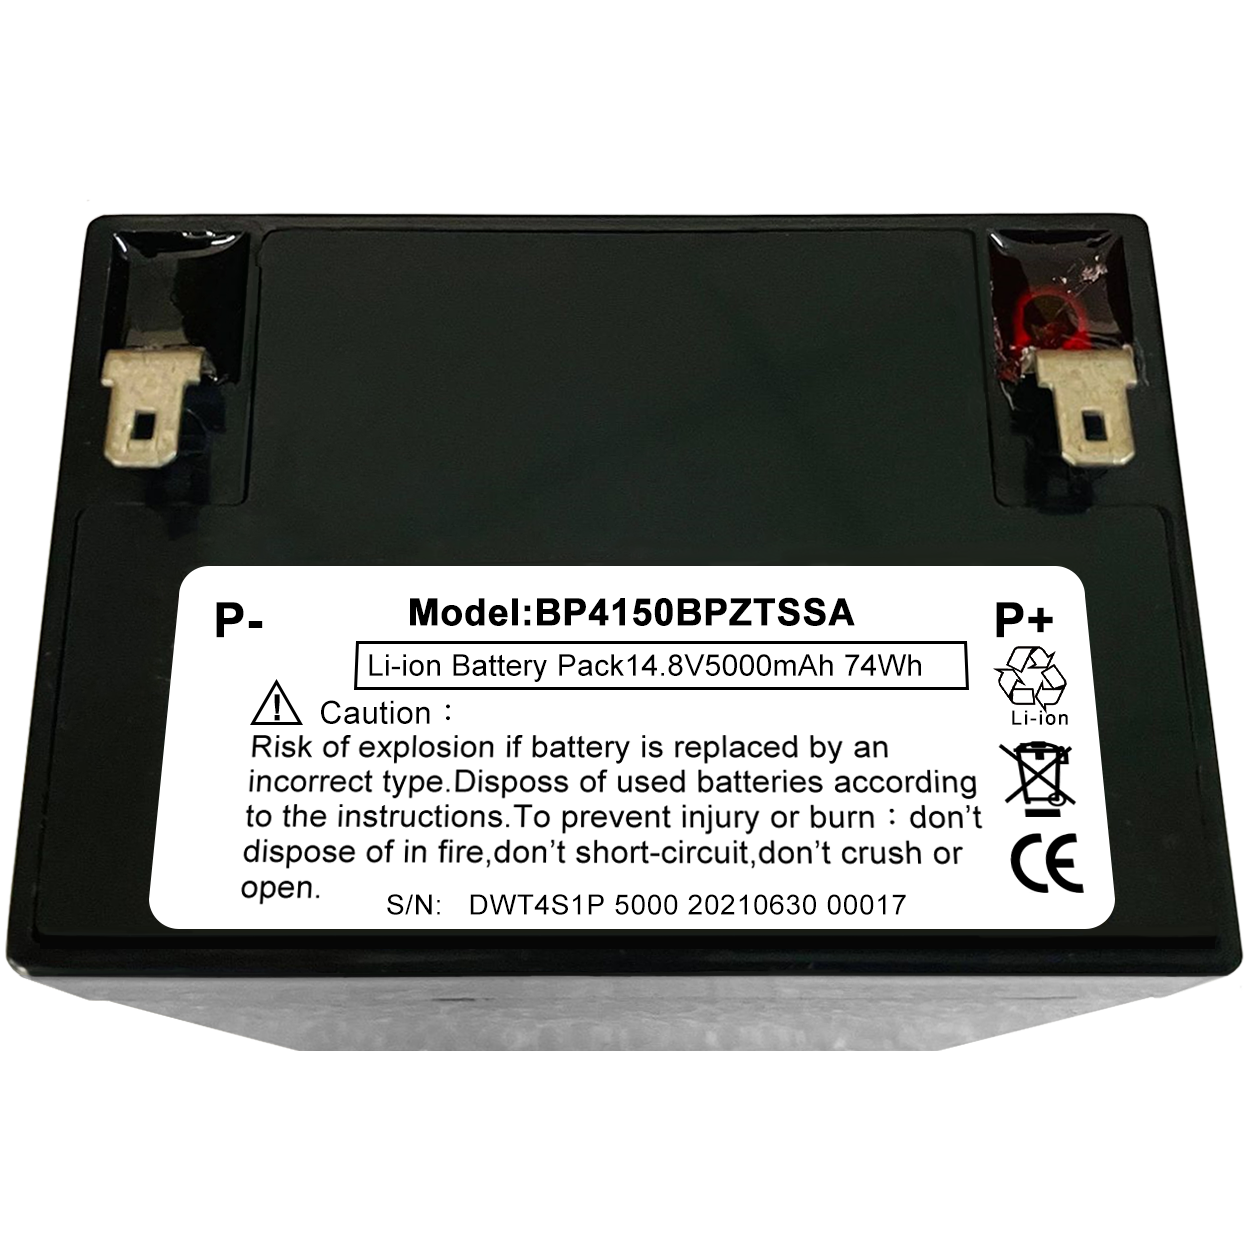 ModelBP4150BPZTSSALi-ion Battery Pack 14.8V5000mAh 74Wh Caution Risk of explosion if battery is replaced by anincorrect type. Disposs of used batteries accordingto the instructions. To prevent injury or burn: don'tdispose of in fire, don't short-circuit, don't crush oropen. S/N: DWT4S1P 5000 20210630 00017P+Li-ionCE